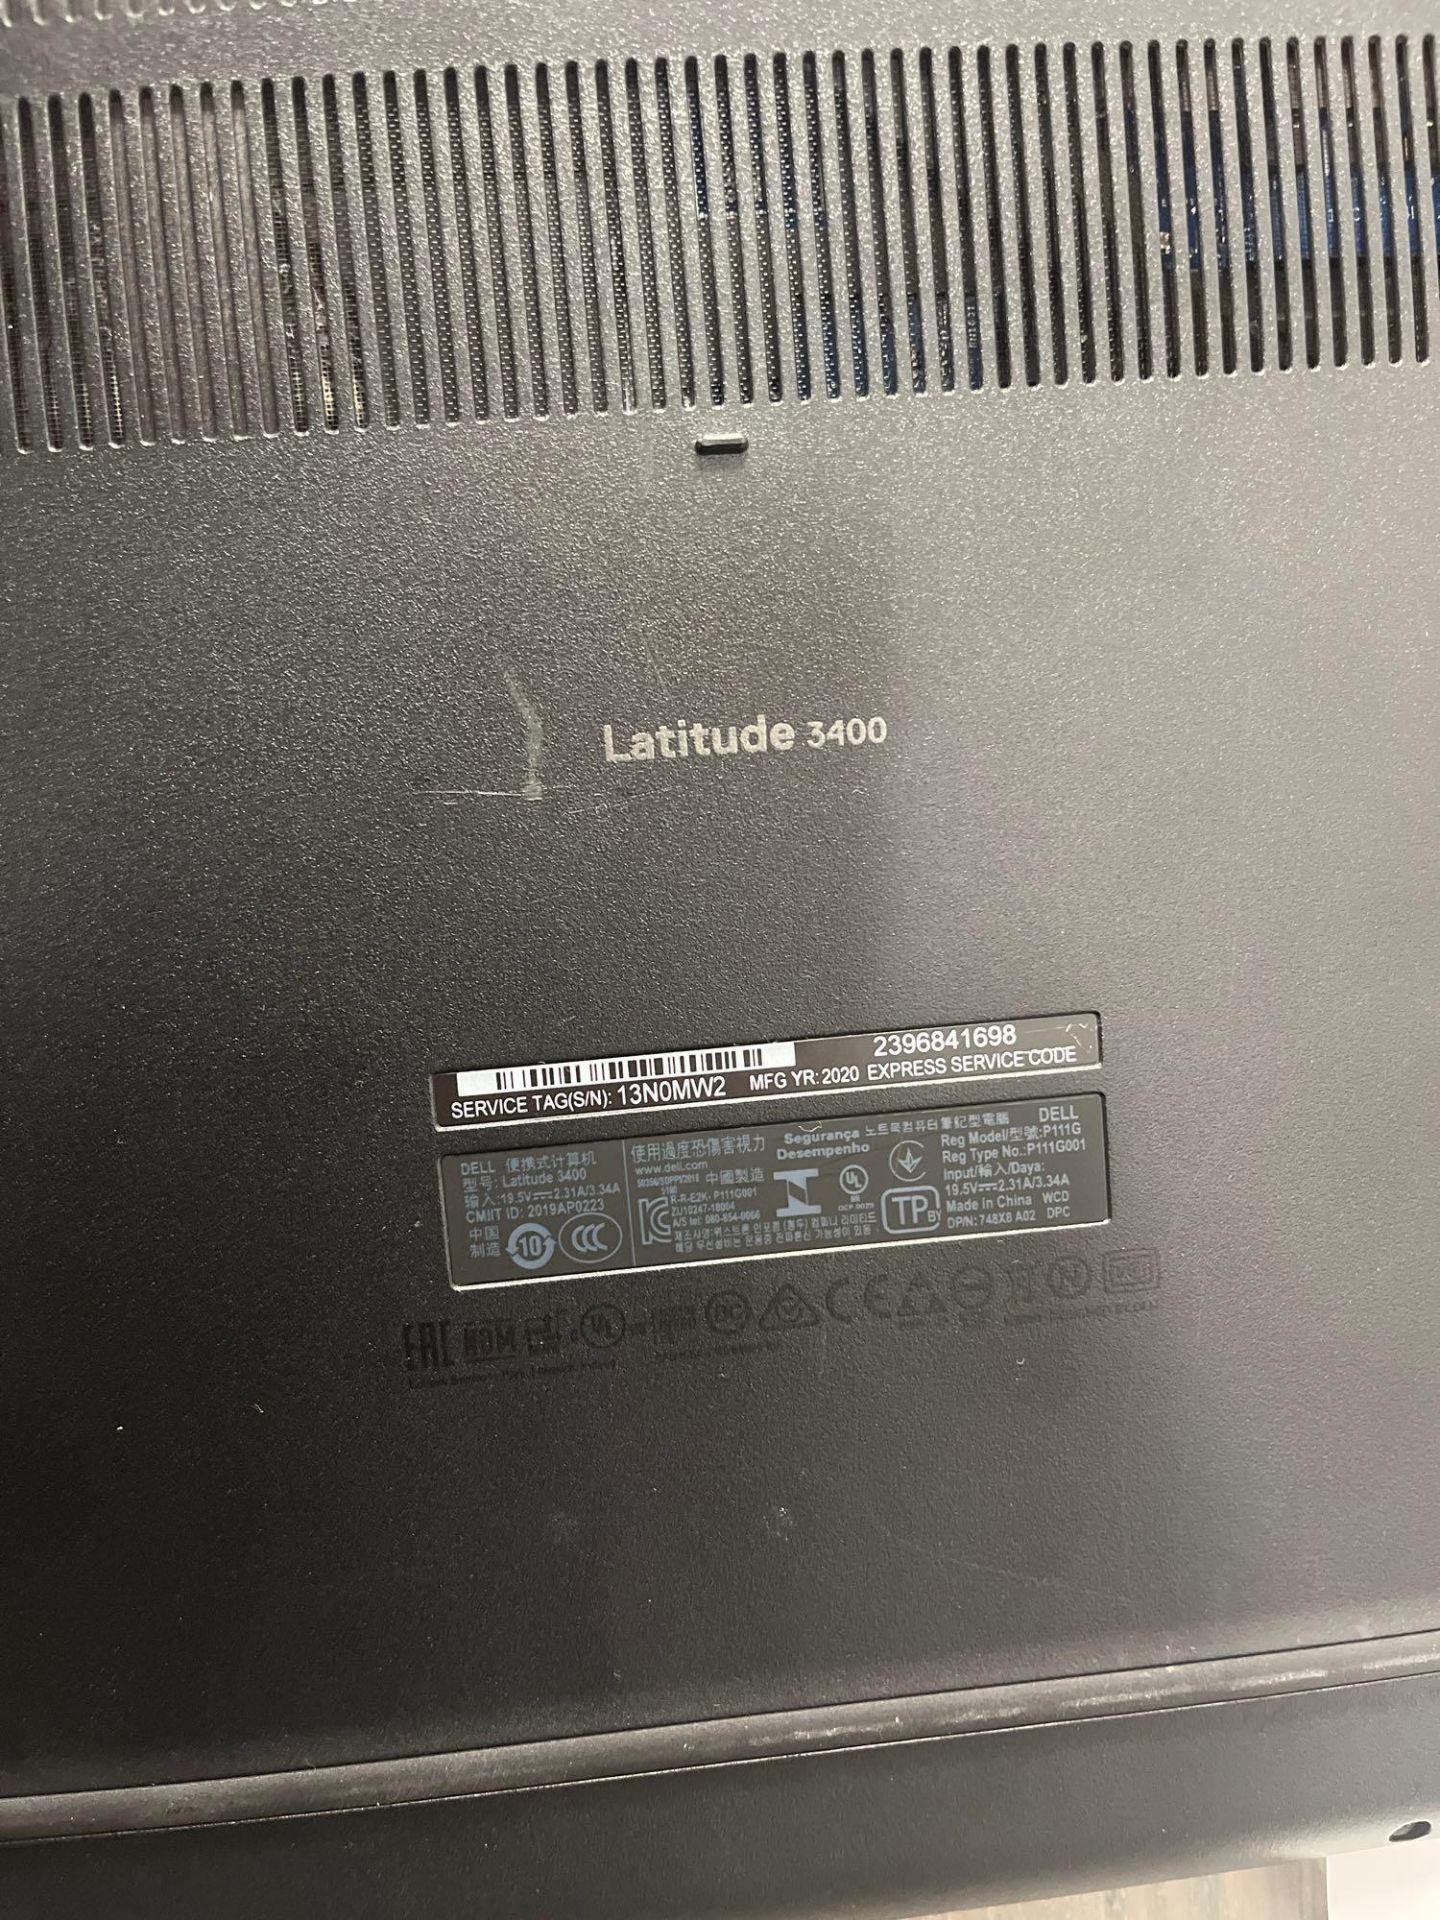 Dell Latitude 3400 Core i5 laptop (no charger) (wiped) - Image 4 of 5